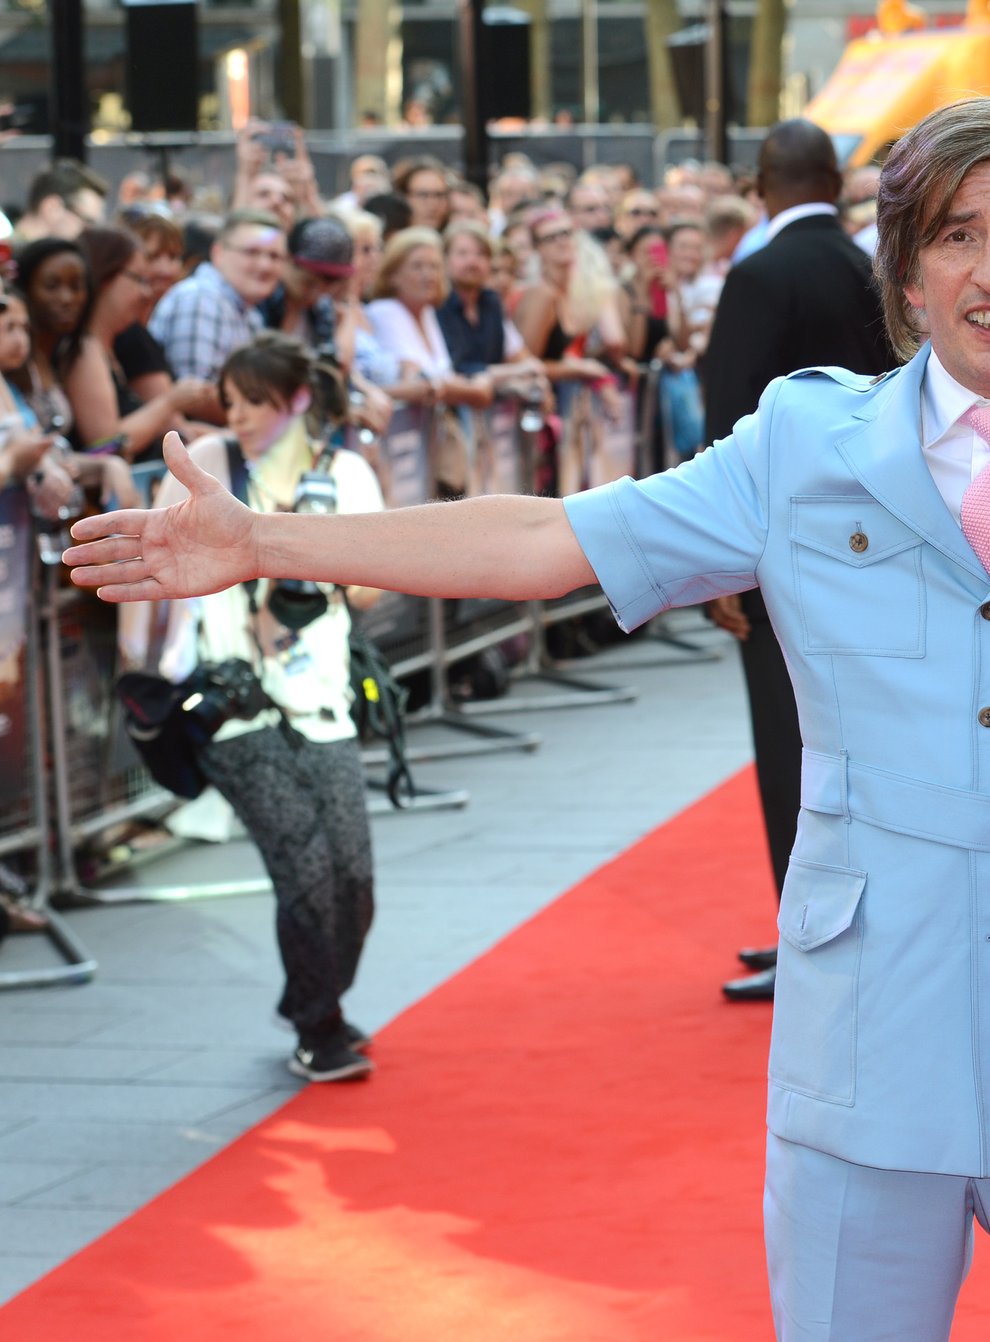 Steve Coogan has played the character Alan Partridge since he first appeared on the radio in 1991